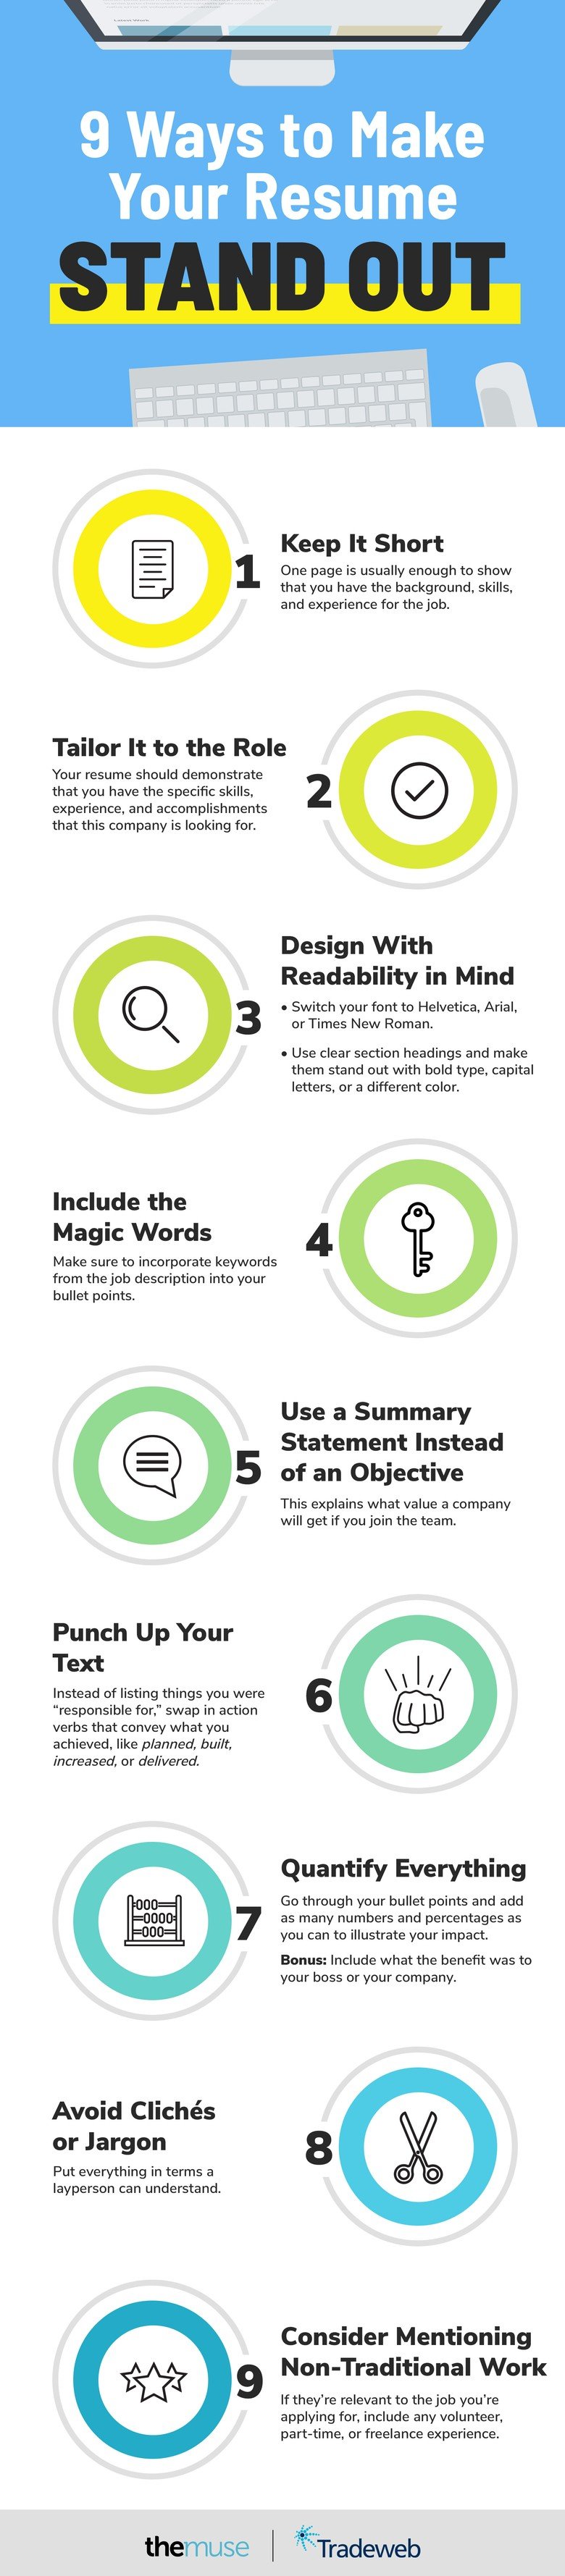 infographic explaining how to make your resume stand out, full text above